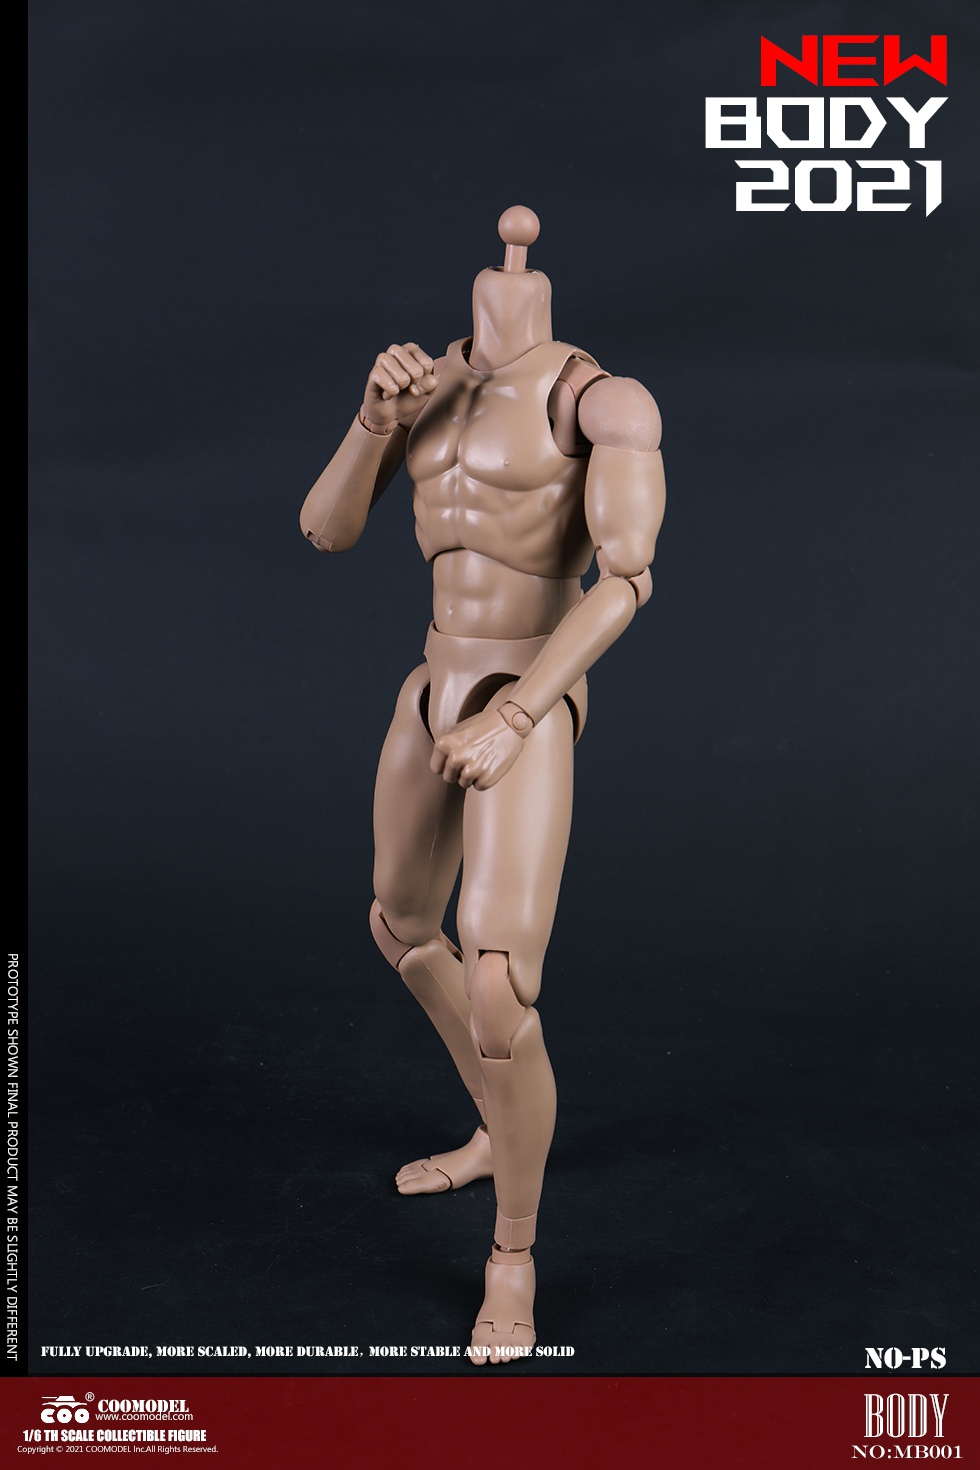 NEW PRODUCT: COOMODEL: 1/6 MB001 standard male body, MB002 tall male body, MB003 muscle male body, MB004 tall muscle body 18090011